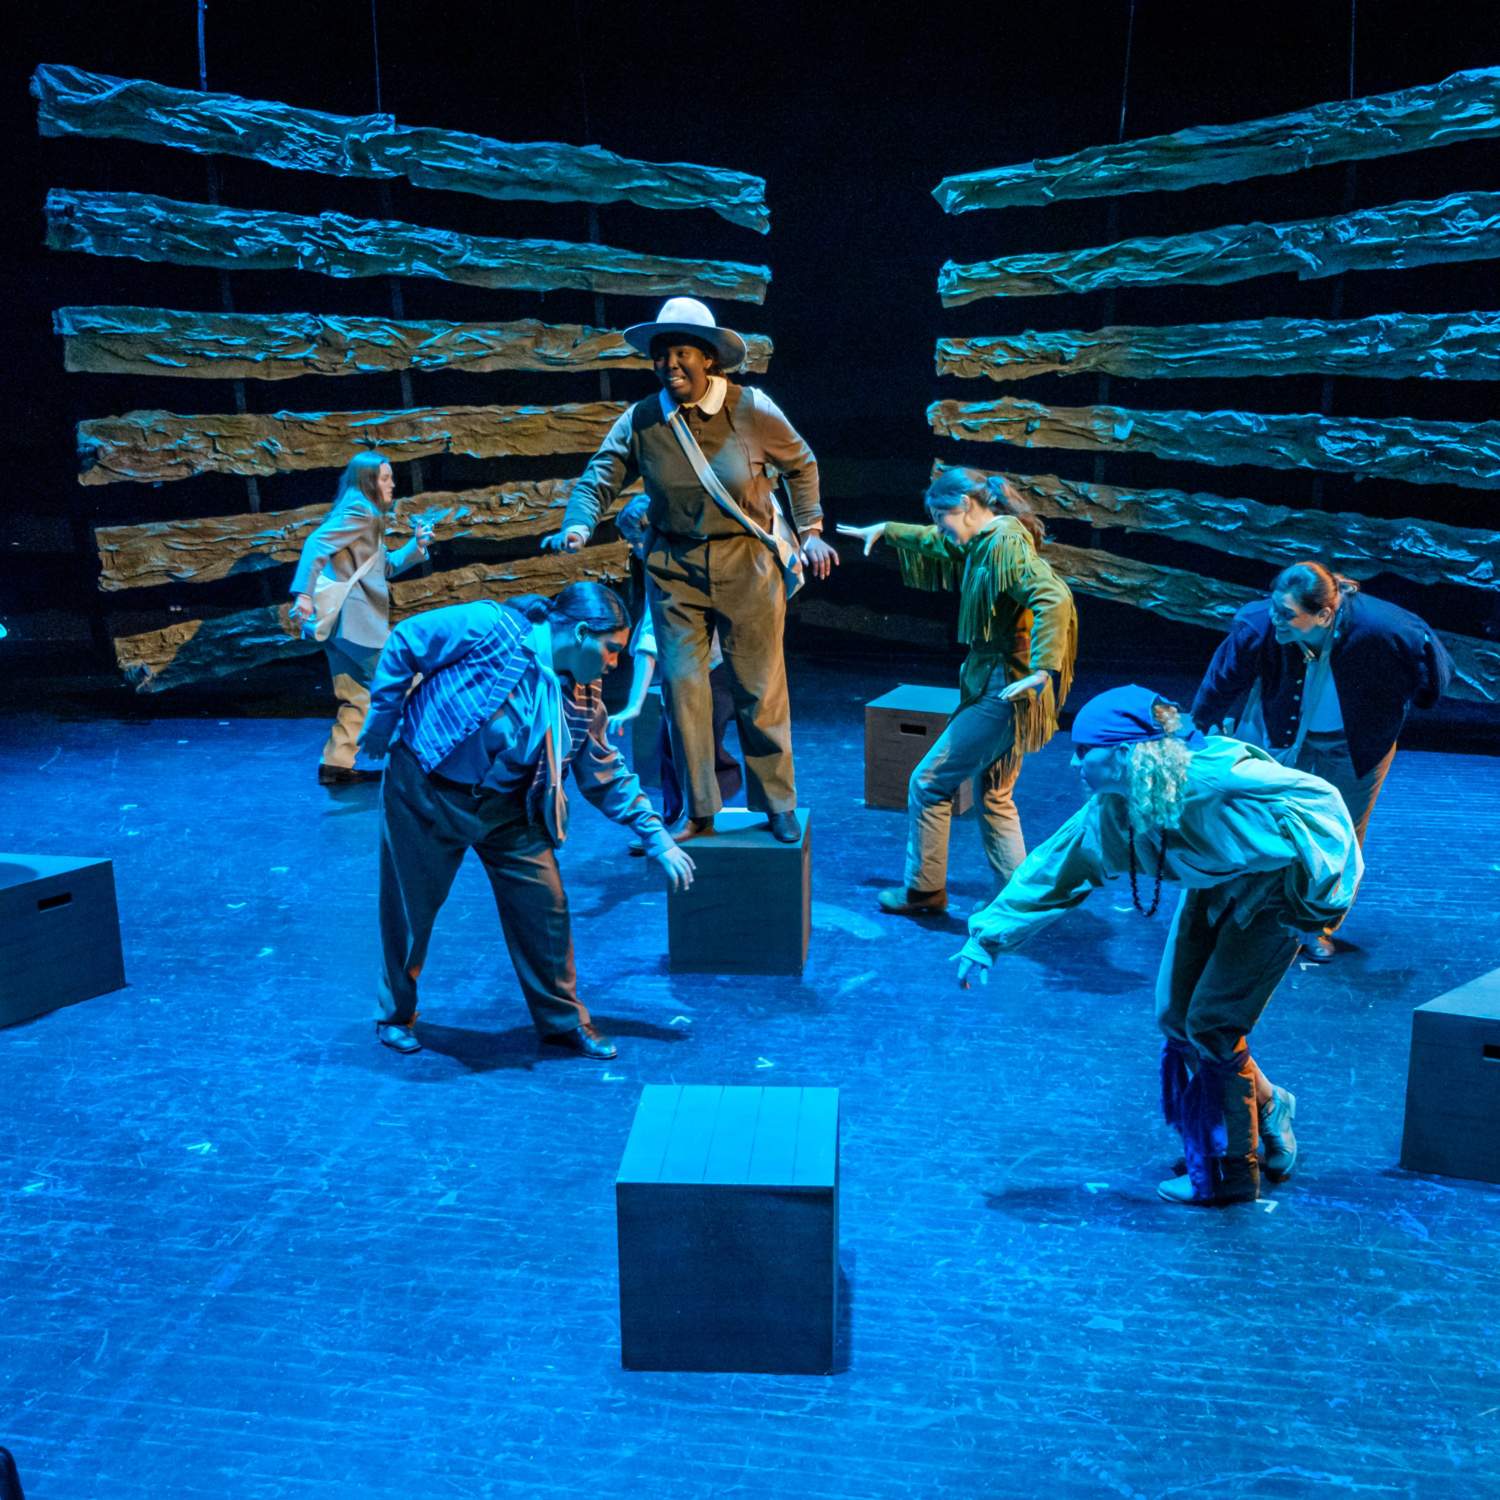 One woman in frontier clothing stands on a crate above the rest. The stage is washed in blue light as several other women crouch and crawl around her on the ground.